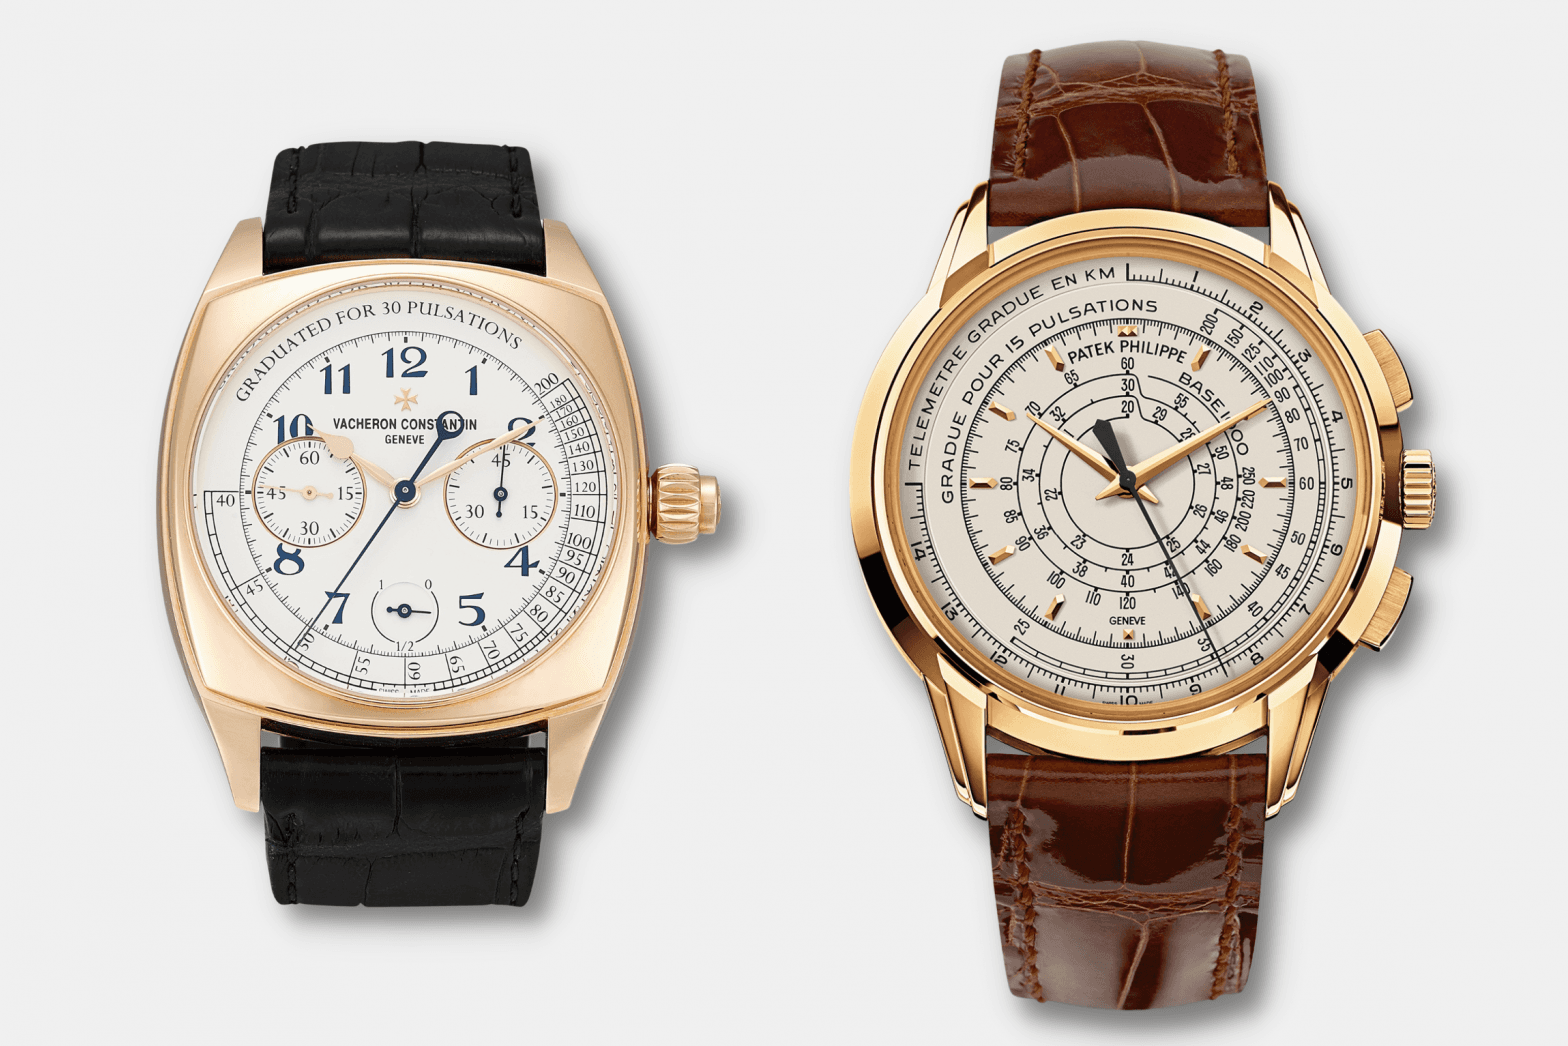 LIMITED EDITION PATEK PHILIPPE MULTI-SCALE CHRONOGRAPH REF. 5975 FOR THE 175TH ANNIVERSARY